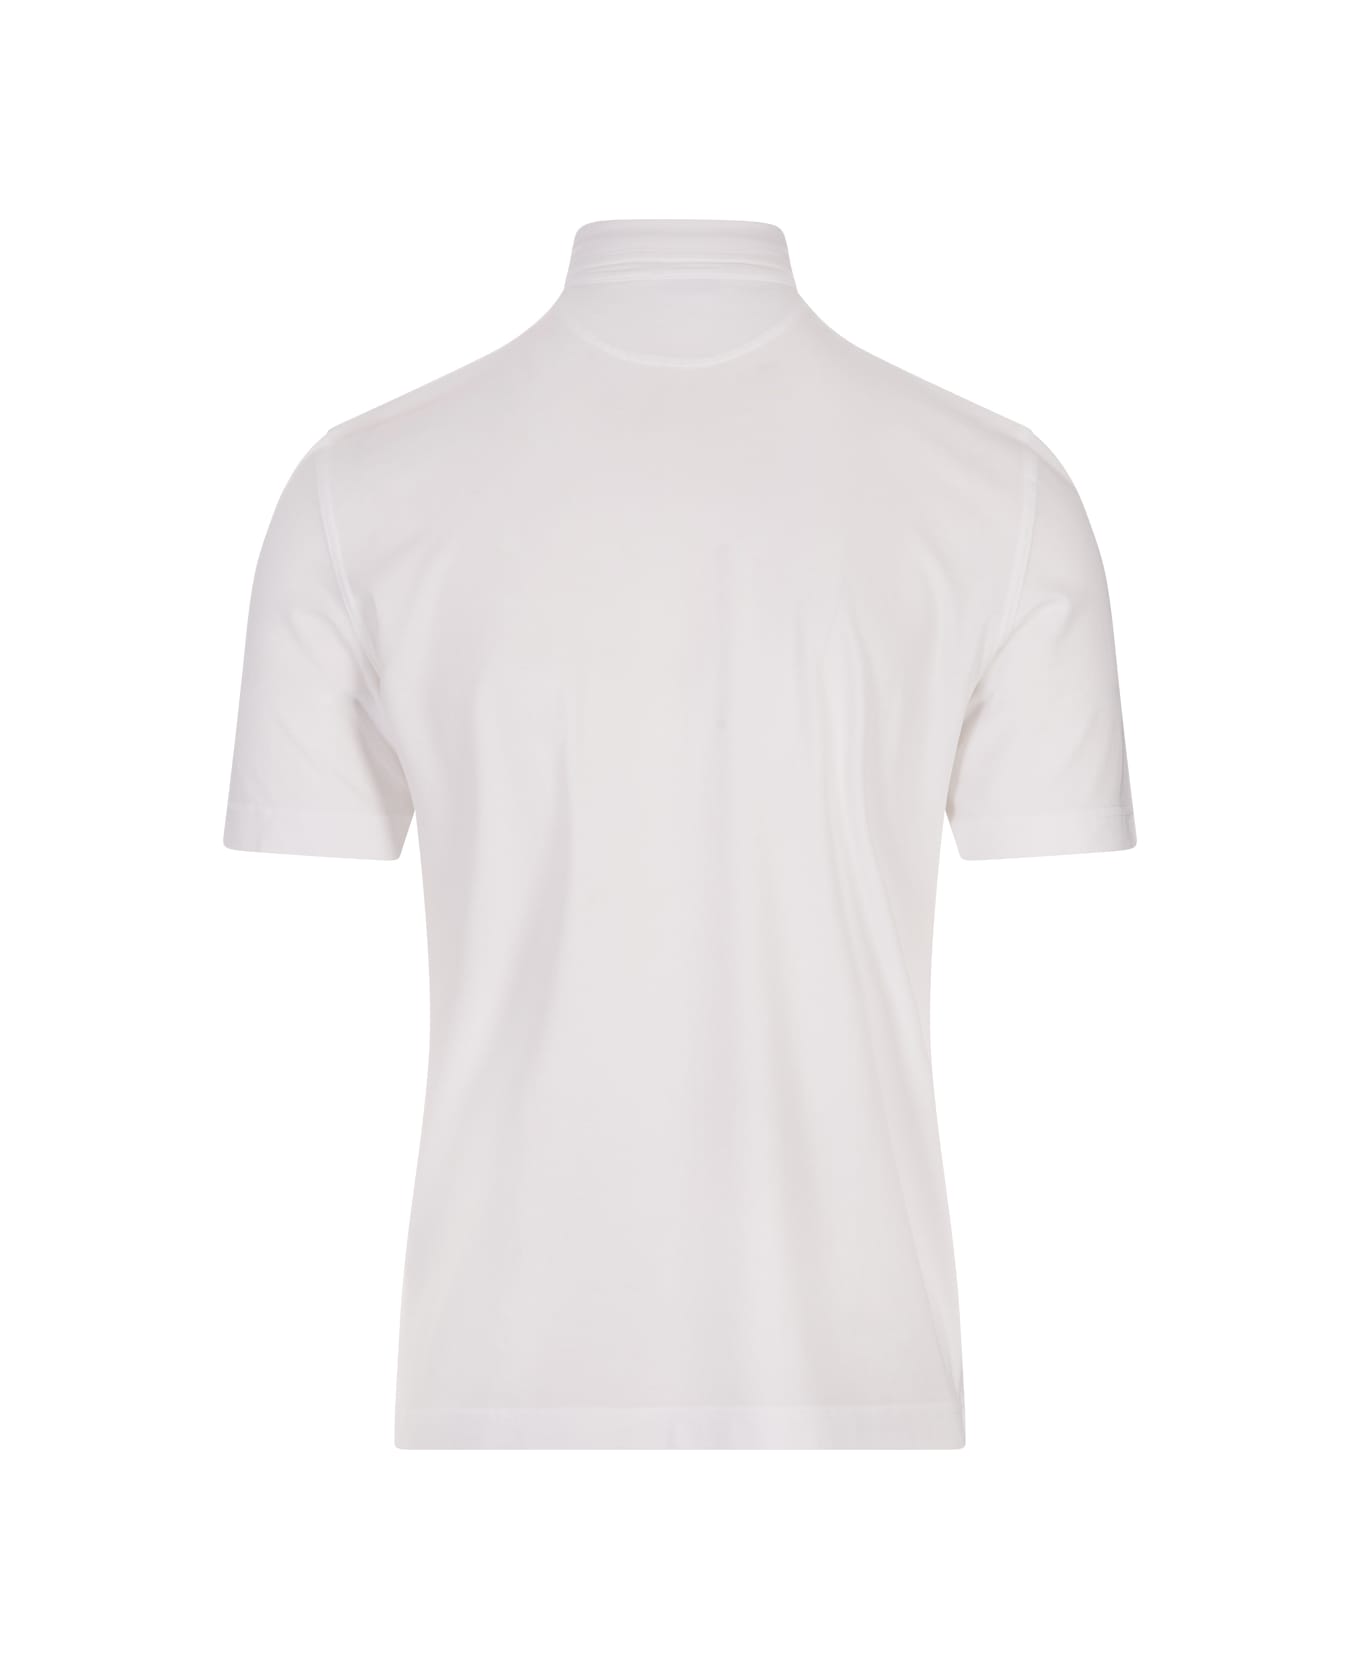 Fedeli Short-sleeved Polo Shirt In White Cotton - White ポロシャツ